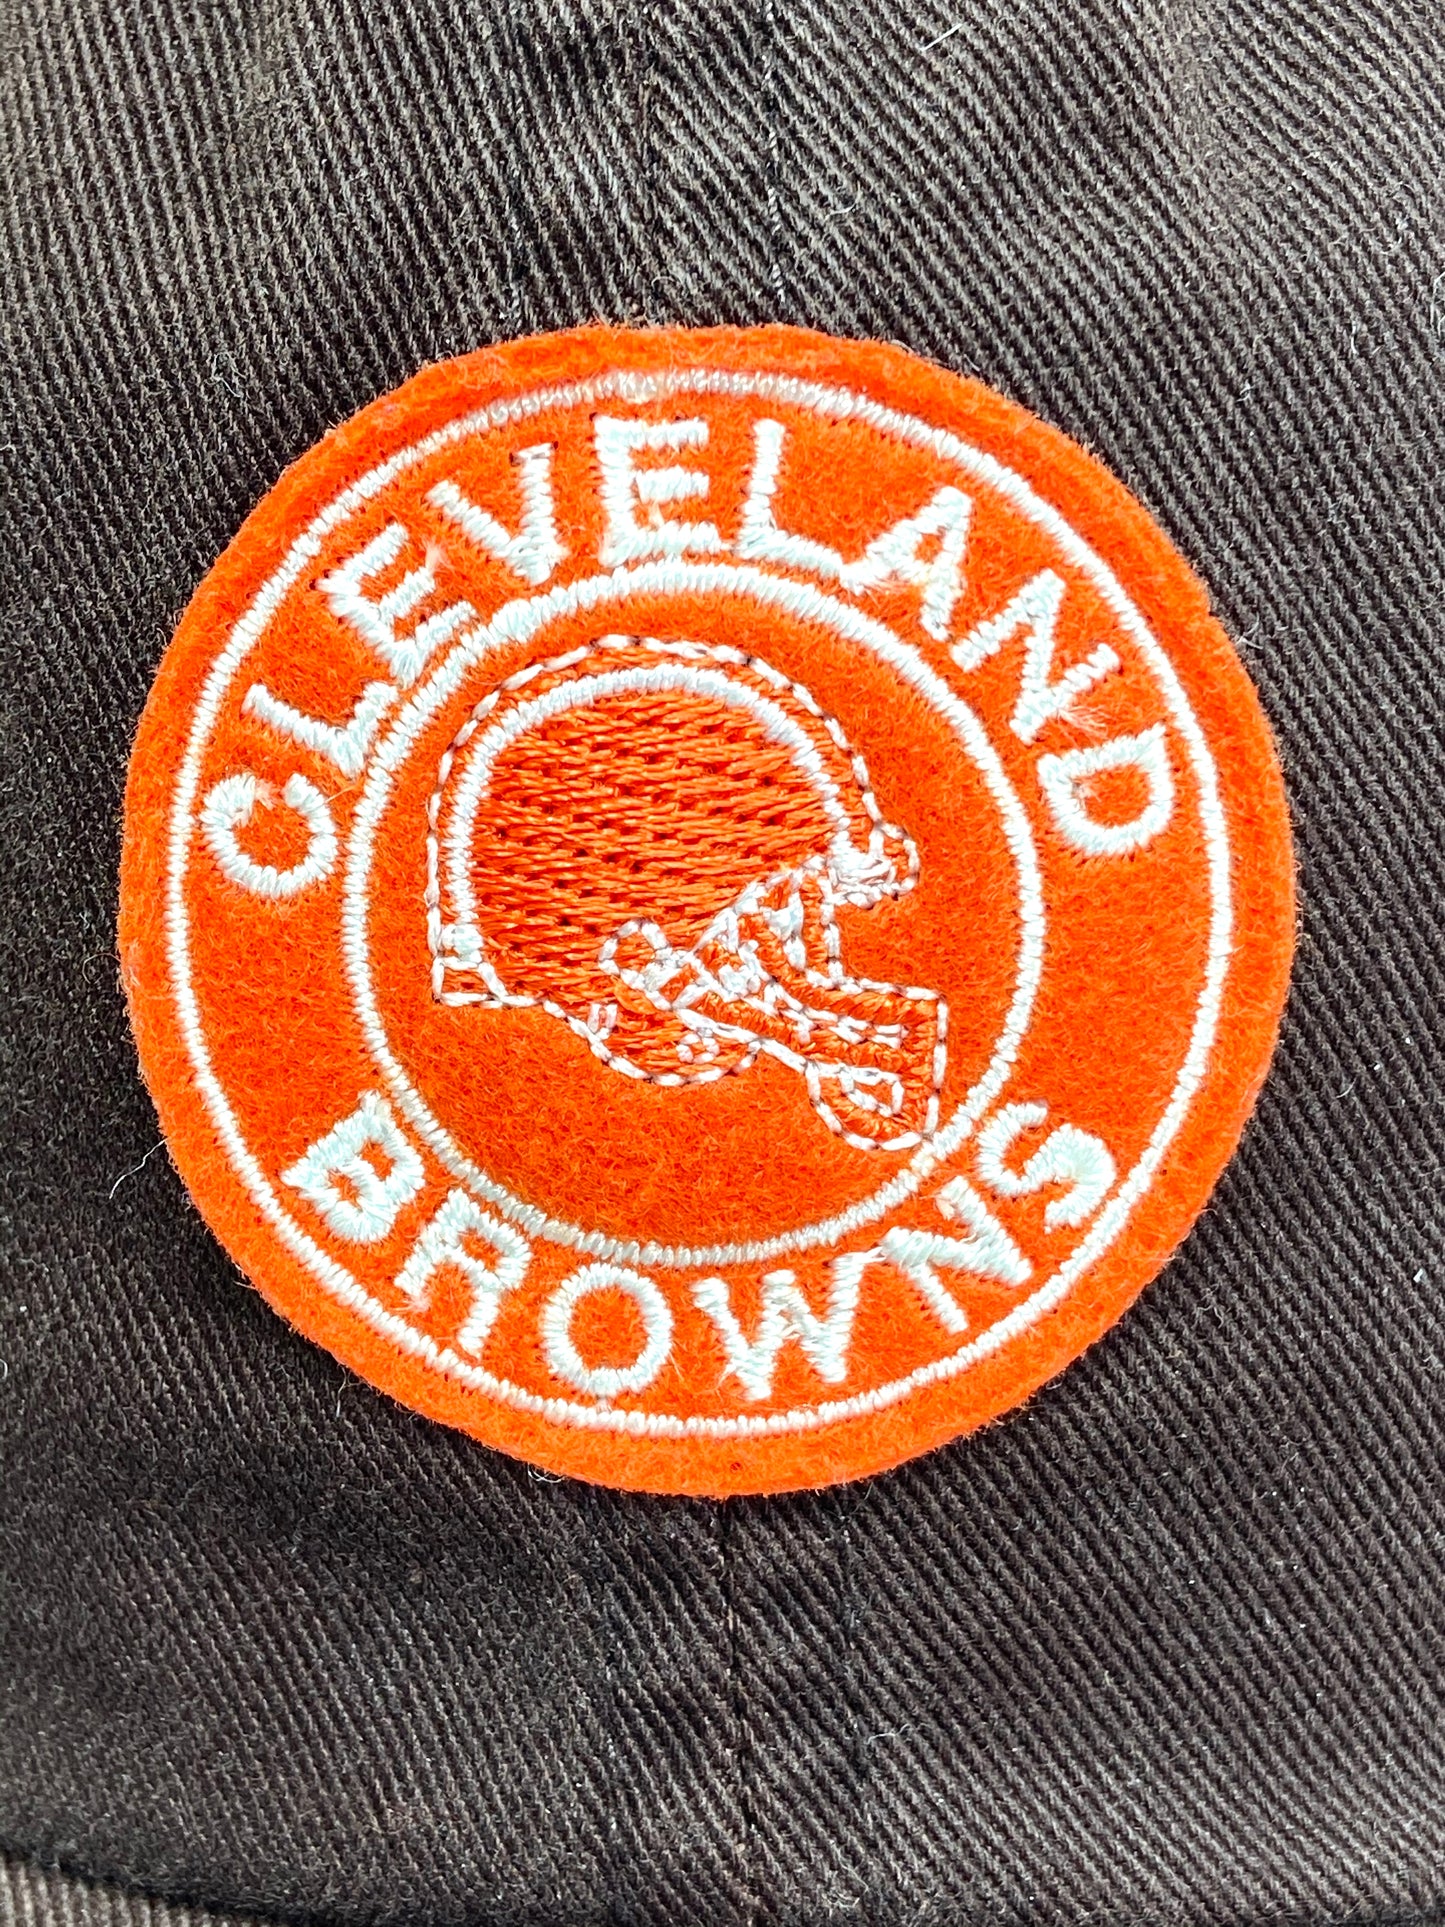 Cleveland Browns Vintage NFL "Tattered" Brown Cap By American Needle